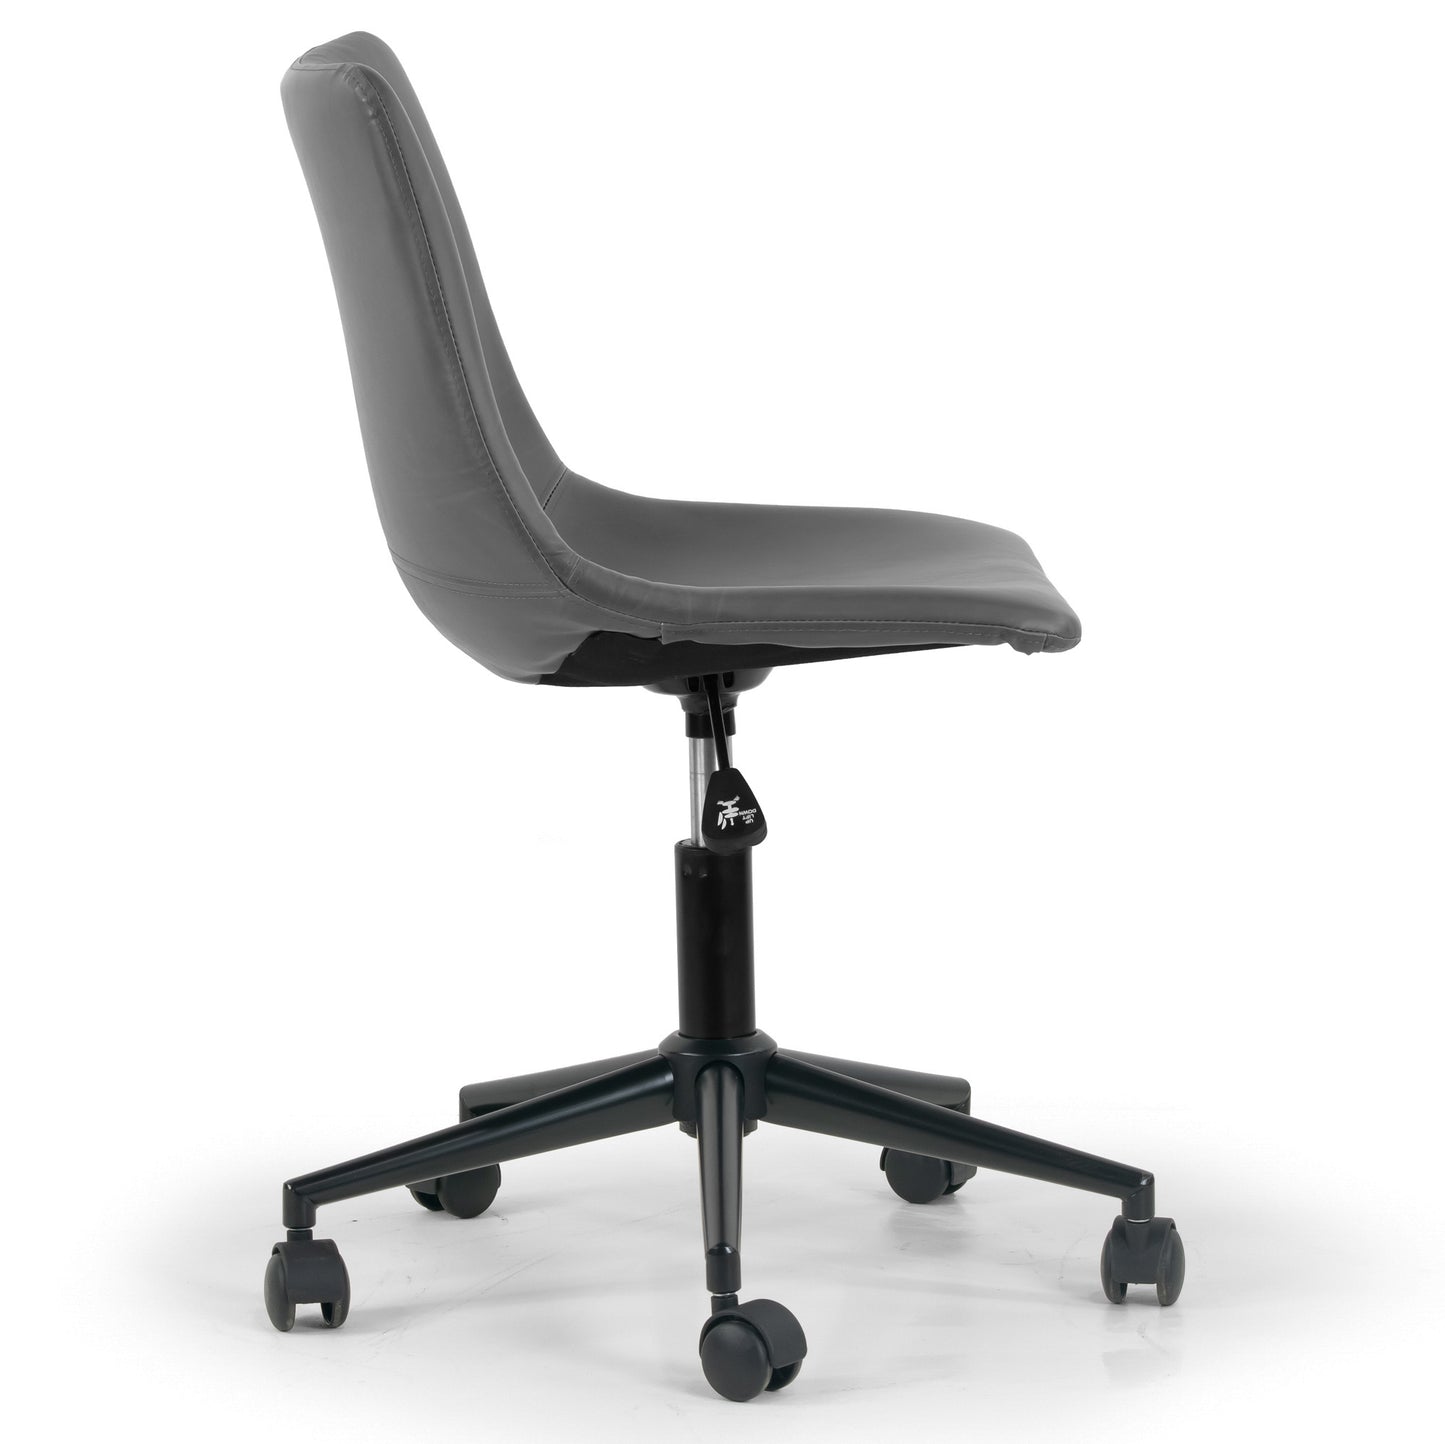 Adan Grey Faux Leather Adjustable Height Swivel Office Chair with Wheel Base